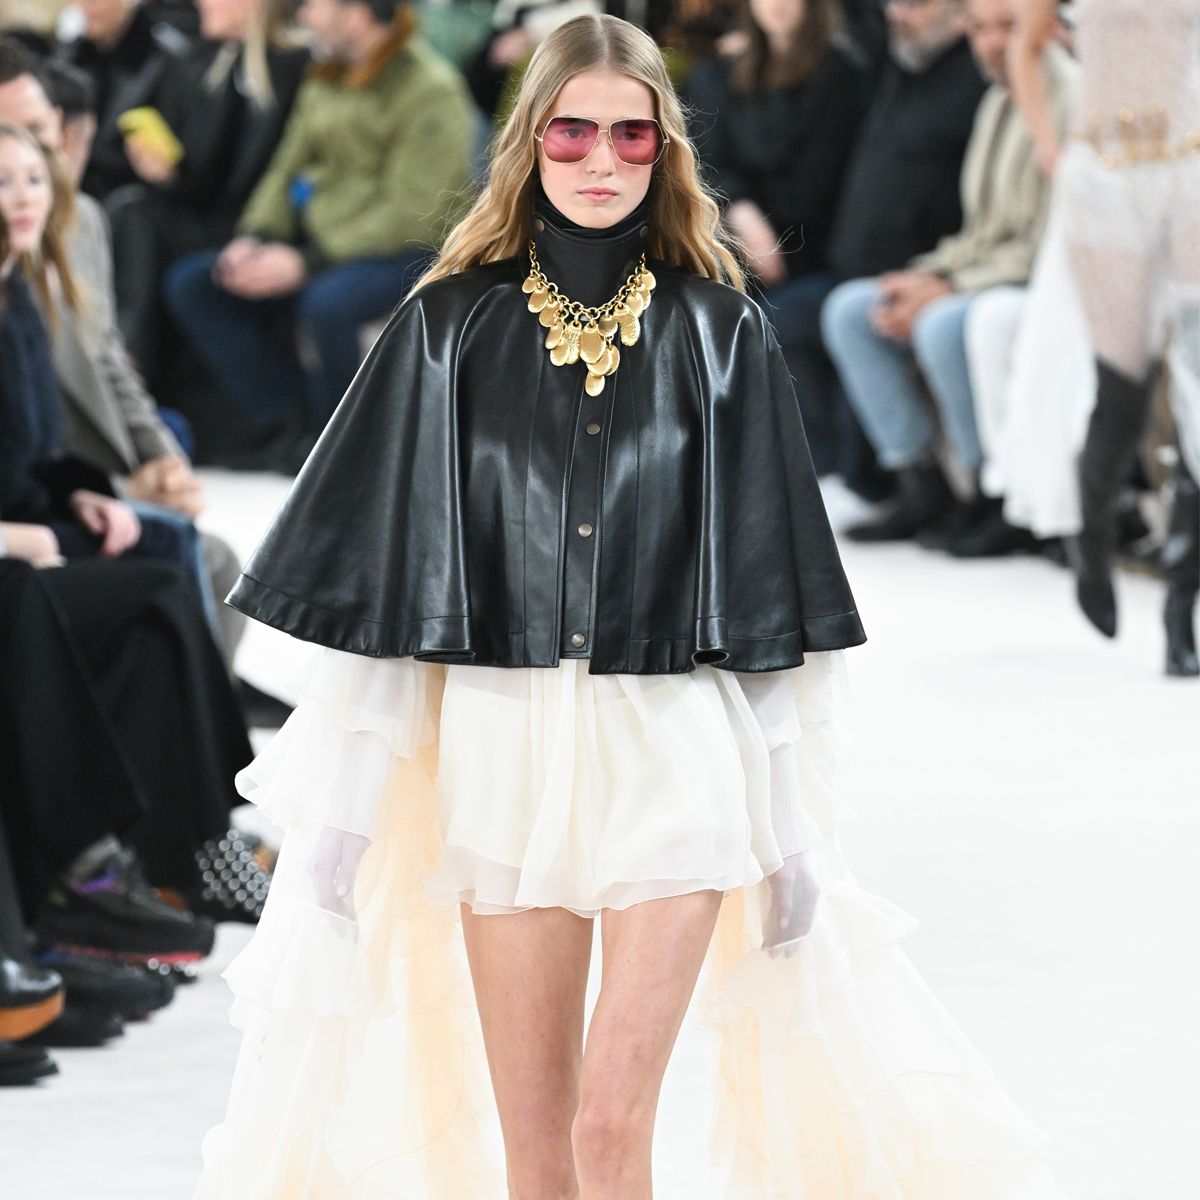 The 7 Biggest Trends From Paris Fashion Week Autumn/Winter